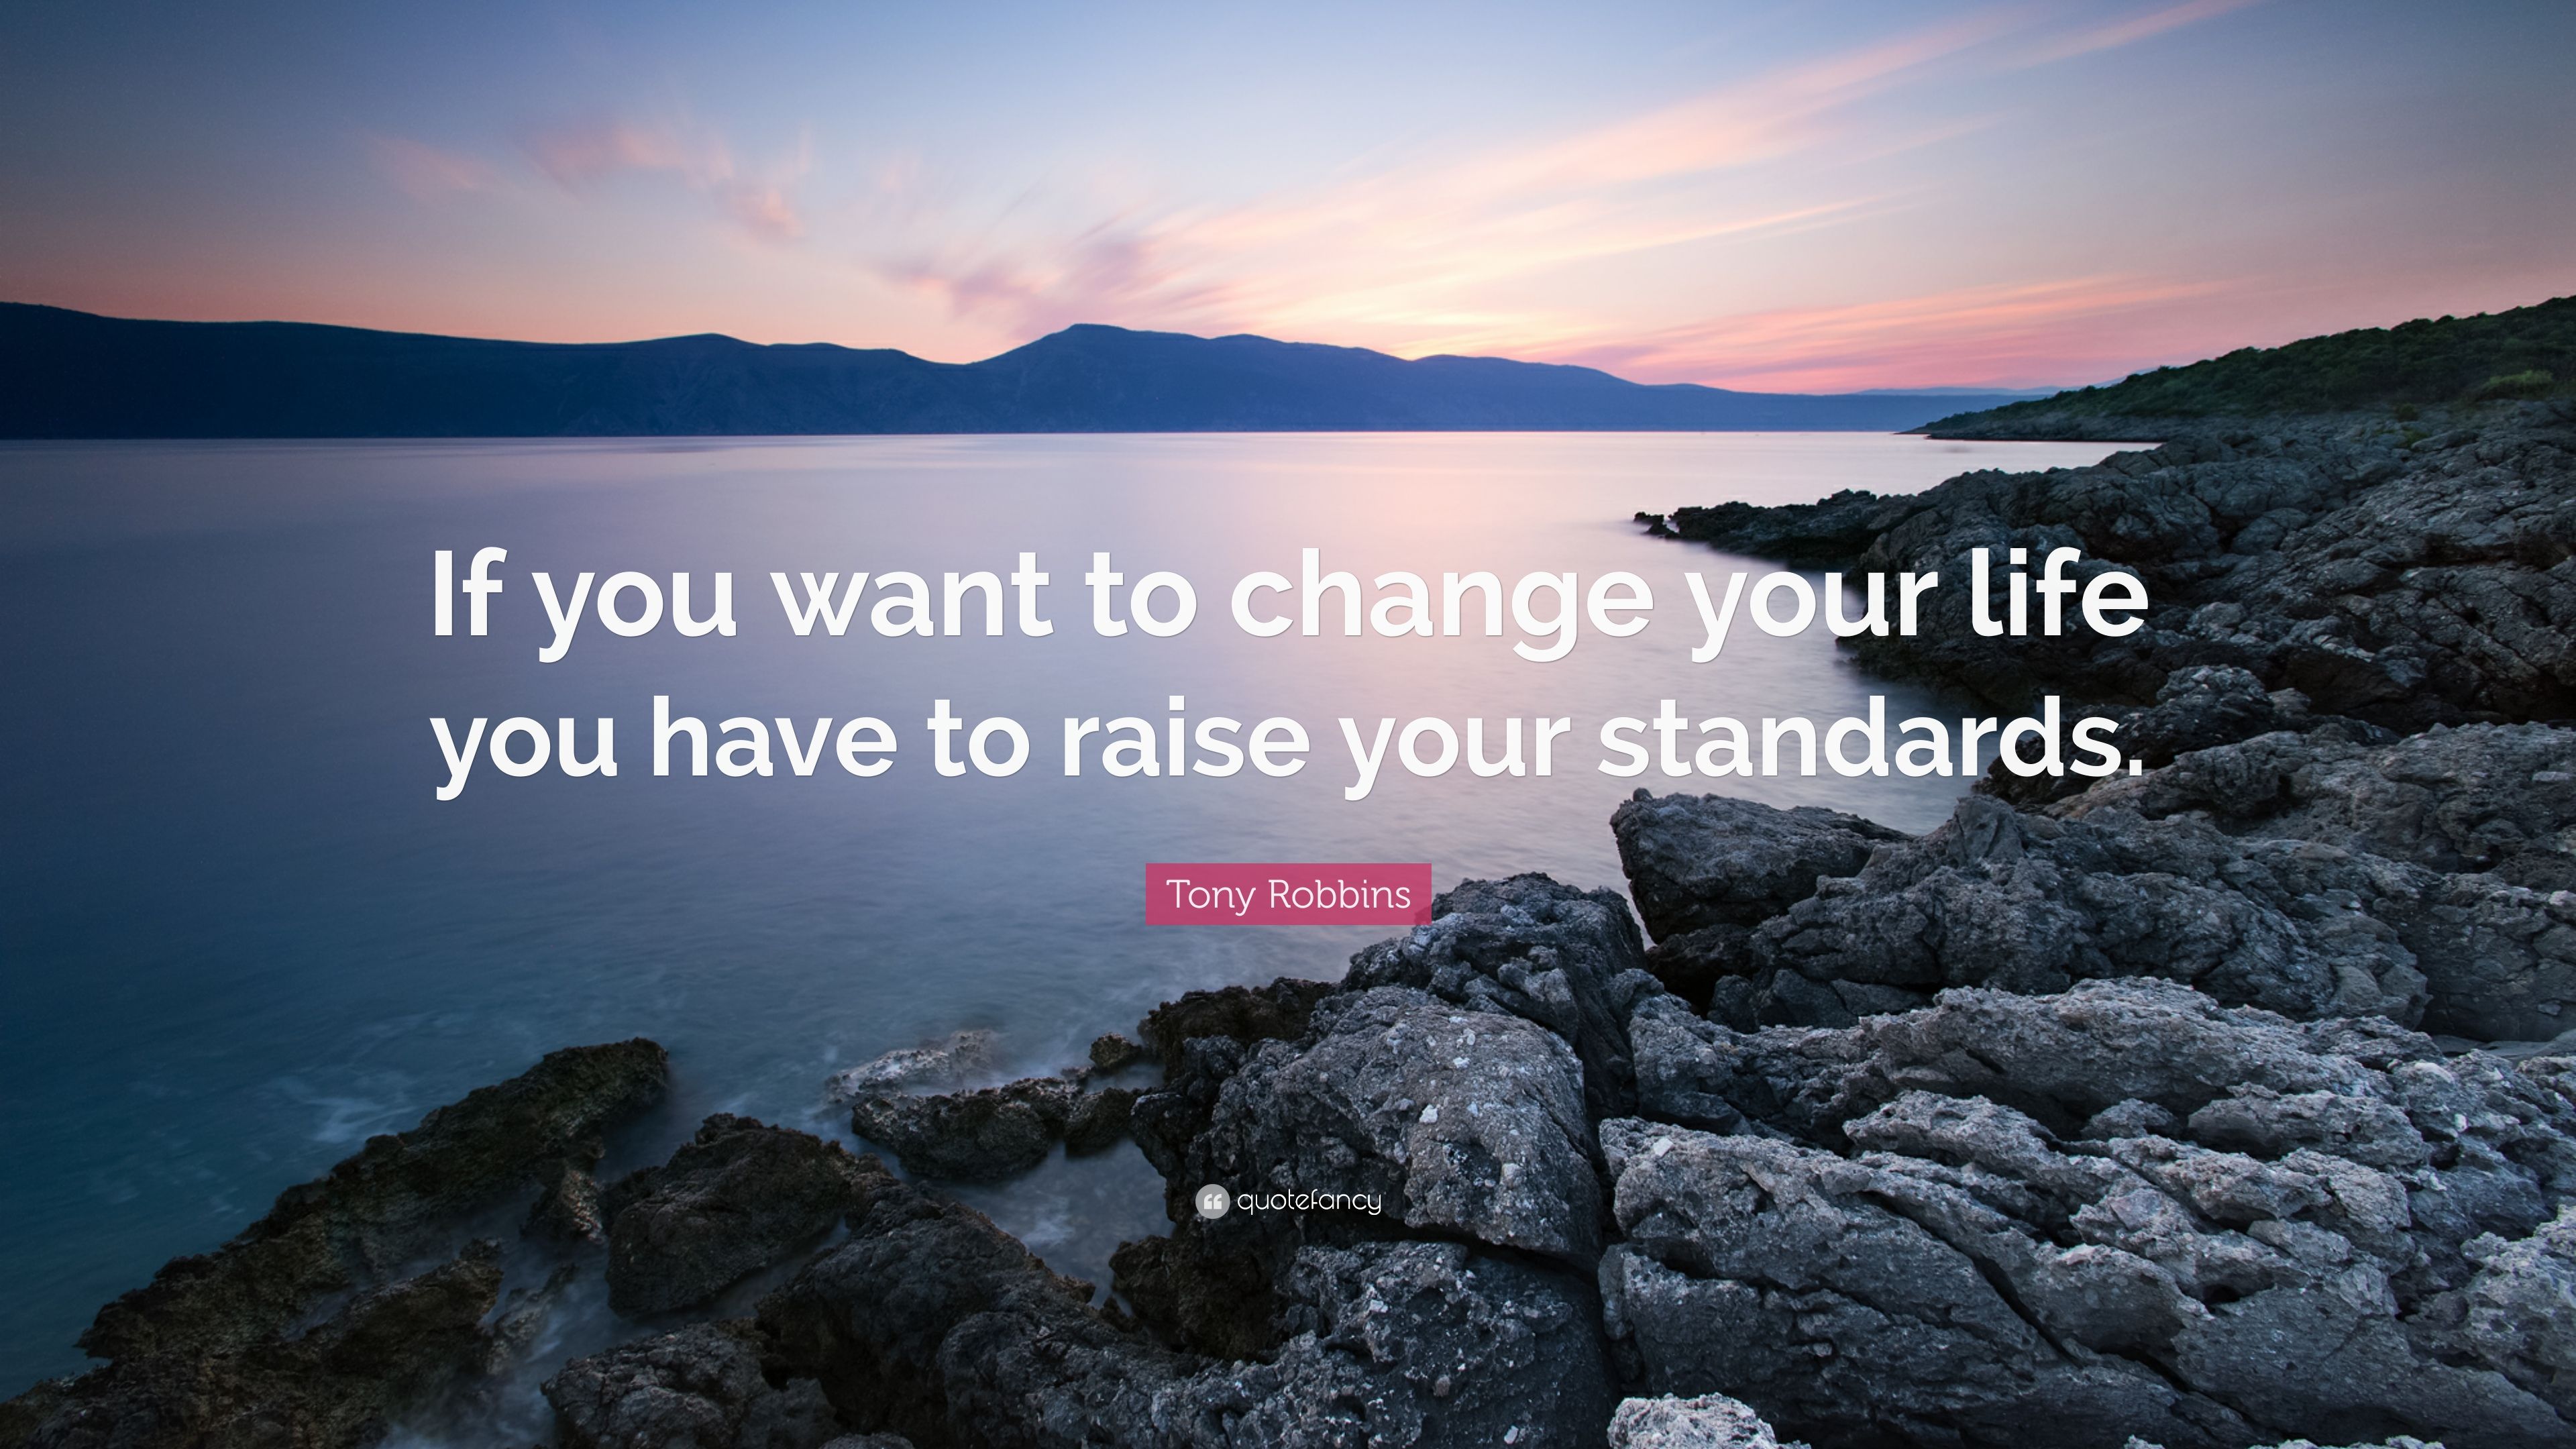 Tony Robbins Quote: “If you want to change your life you have to